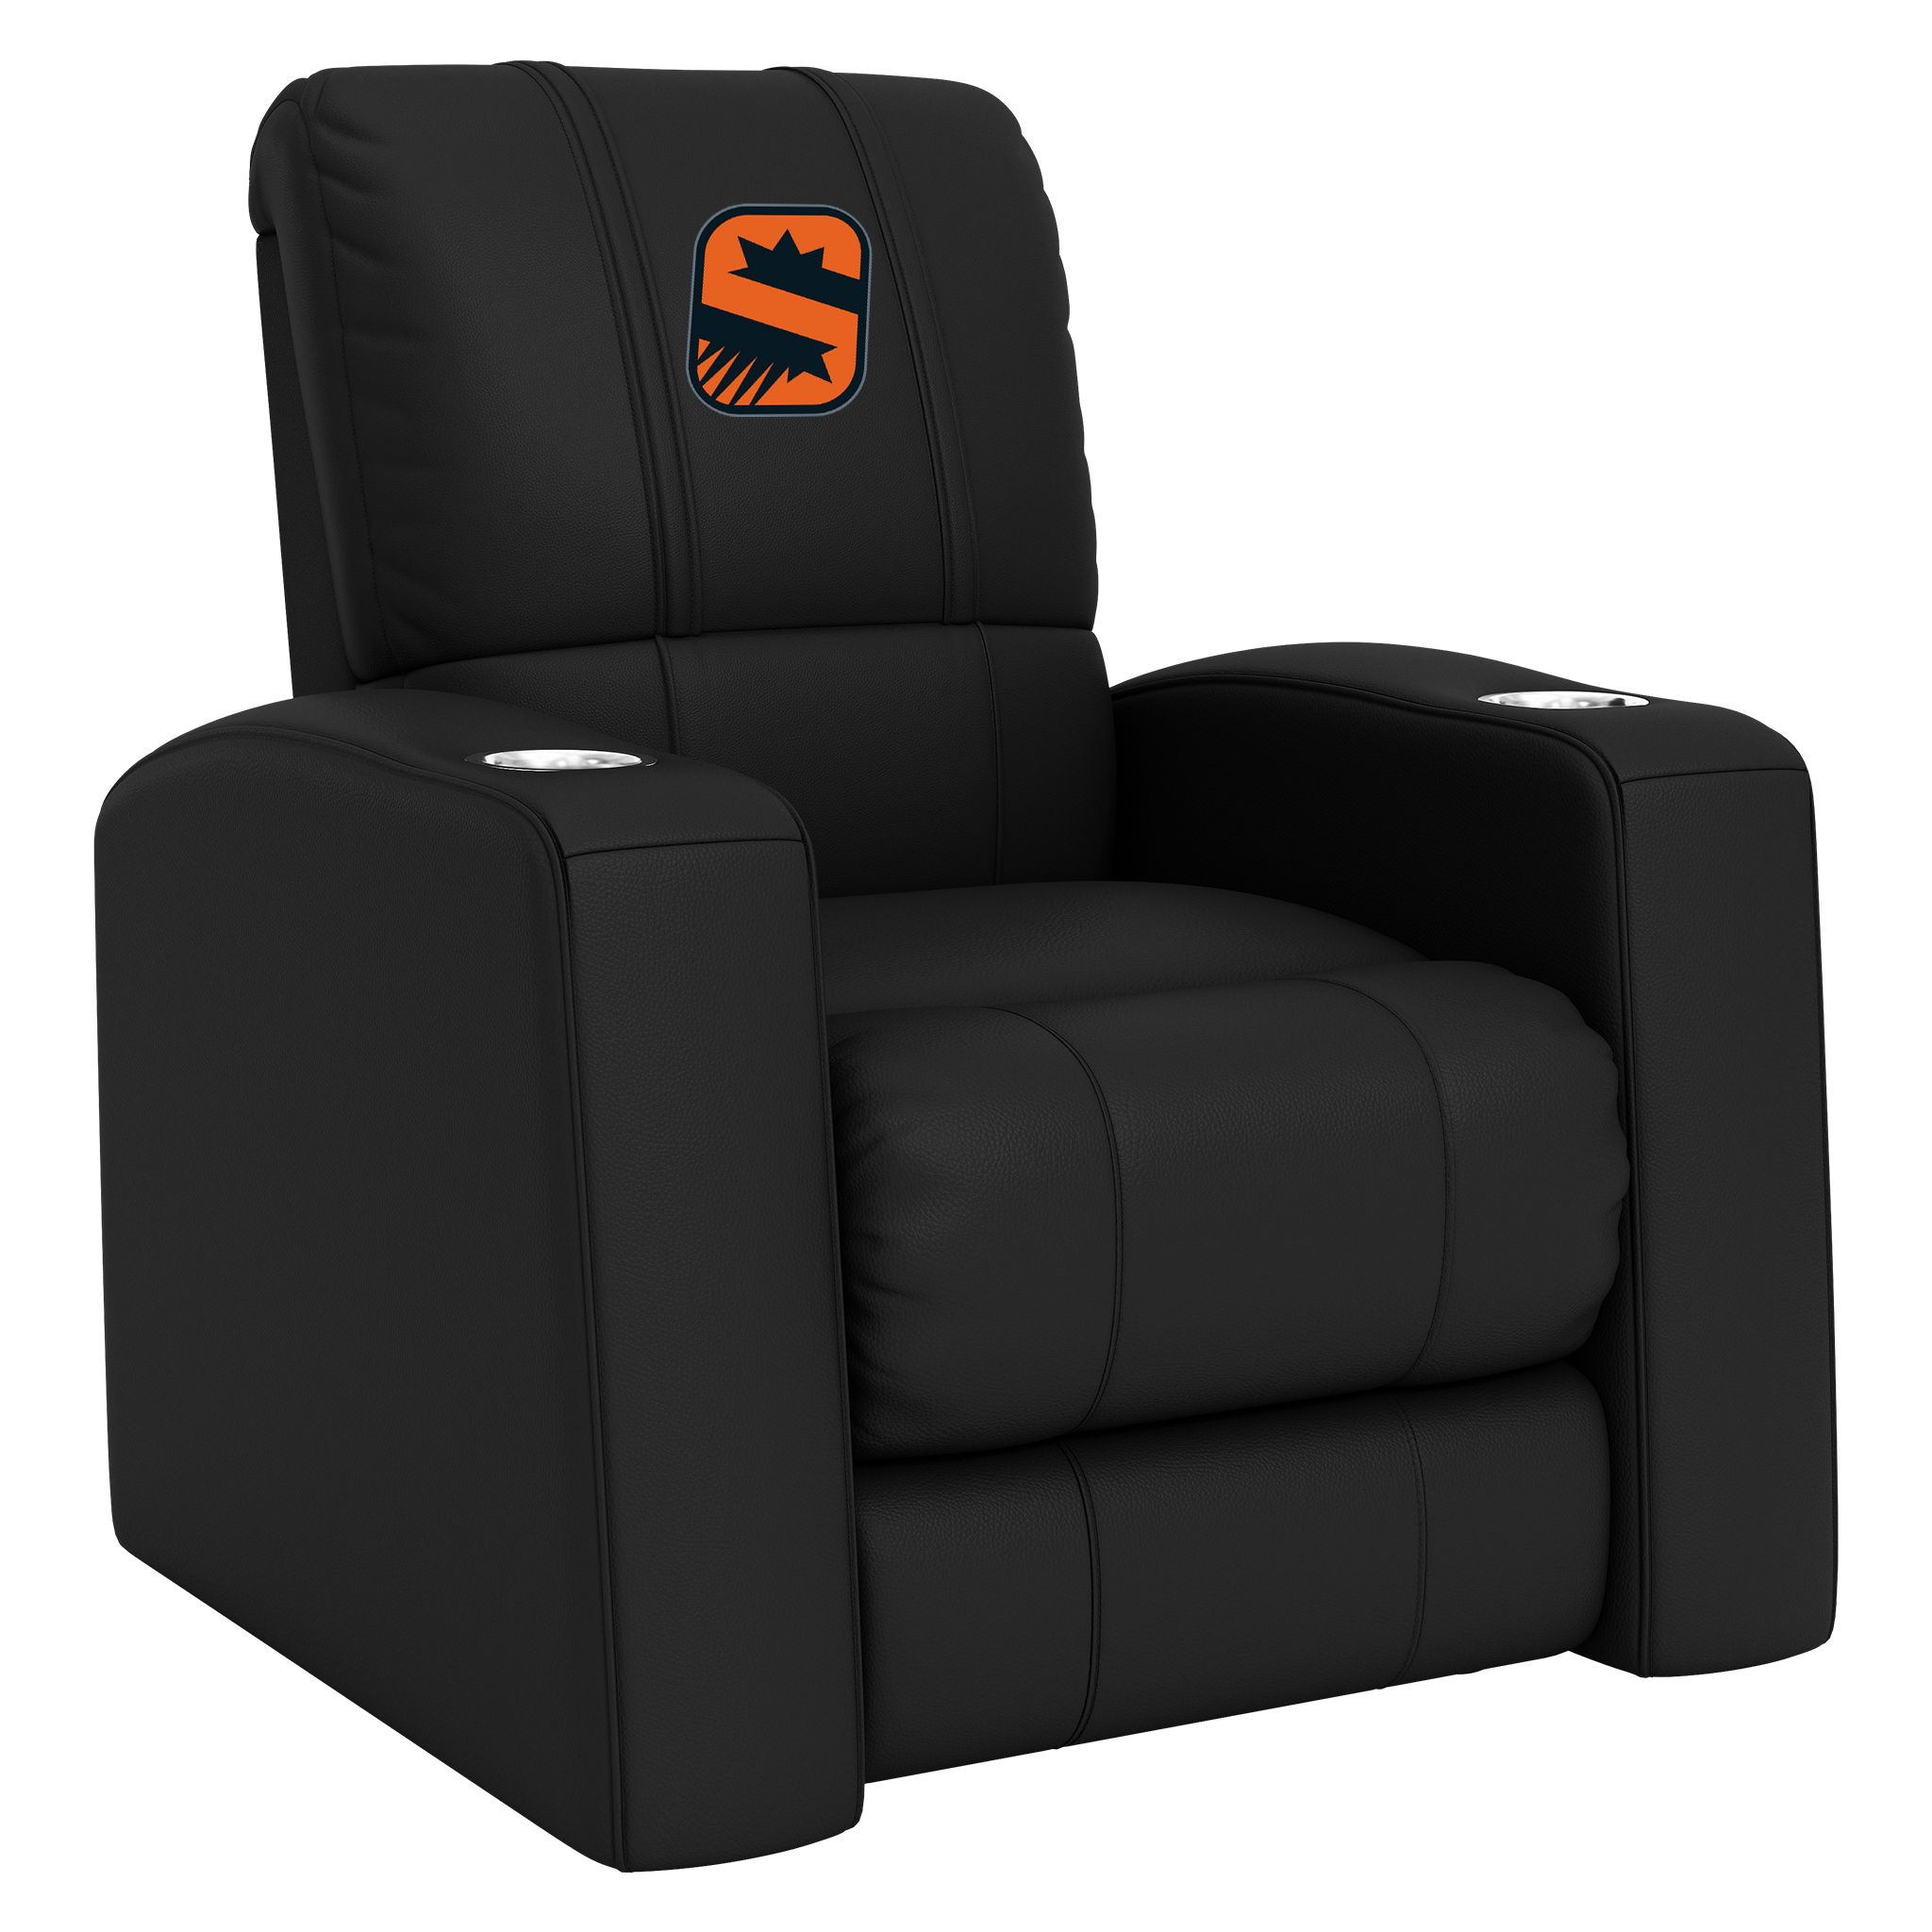 Phoenix Suns Home Theater Recliner with Phoenix Suns S